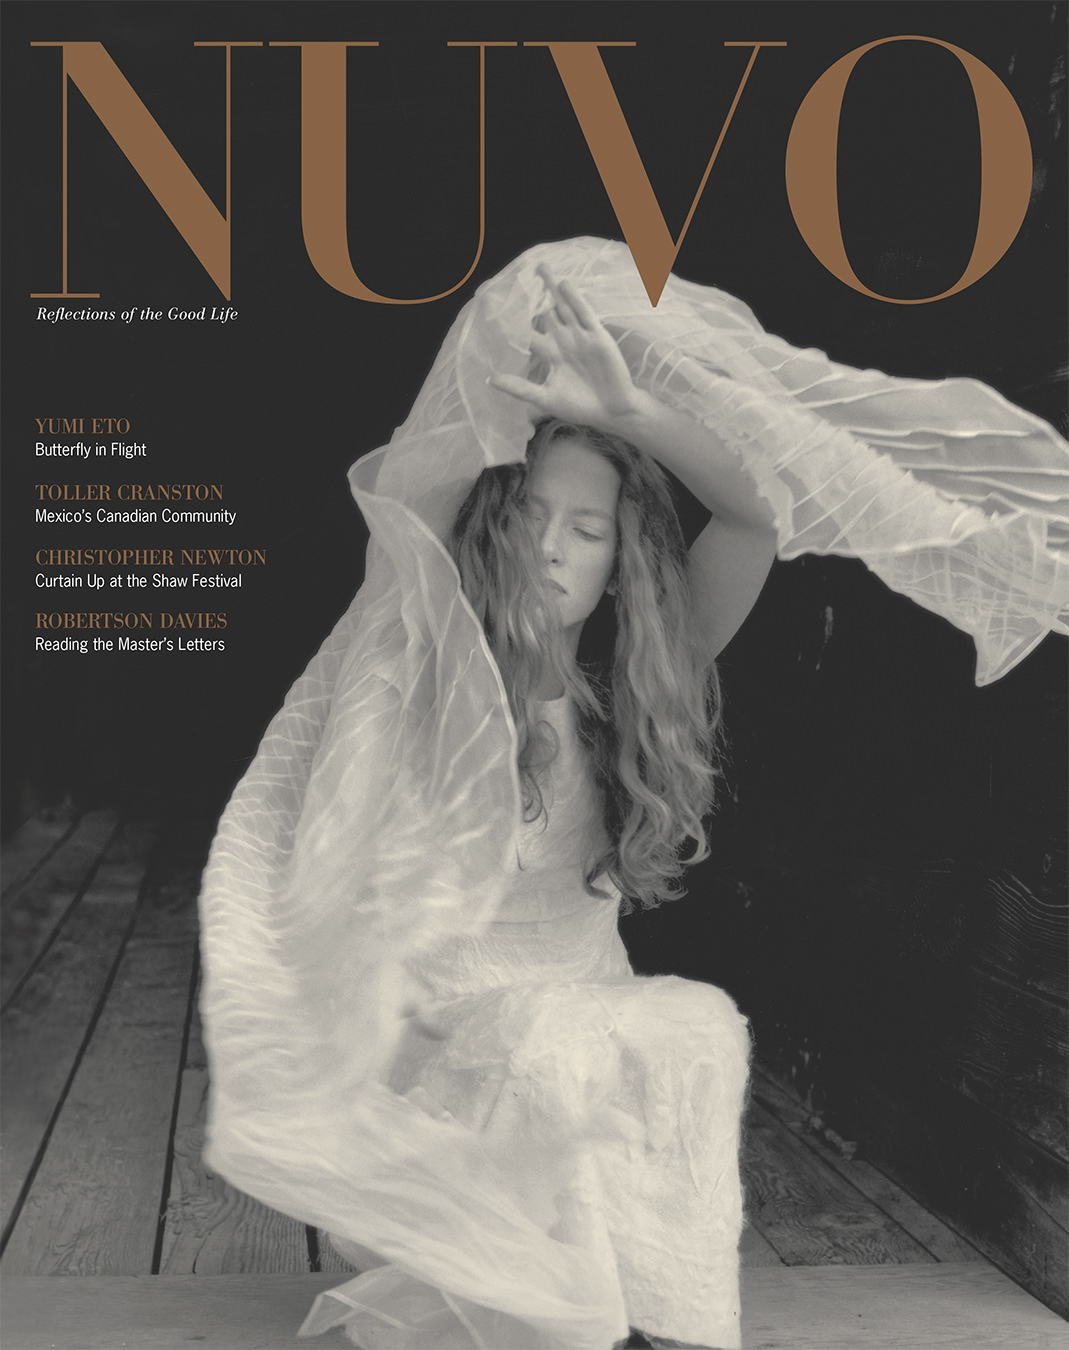 NUVO Magazine Spring 2000 Cover featuring Fashion by Yumi Eto